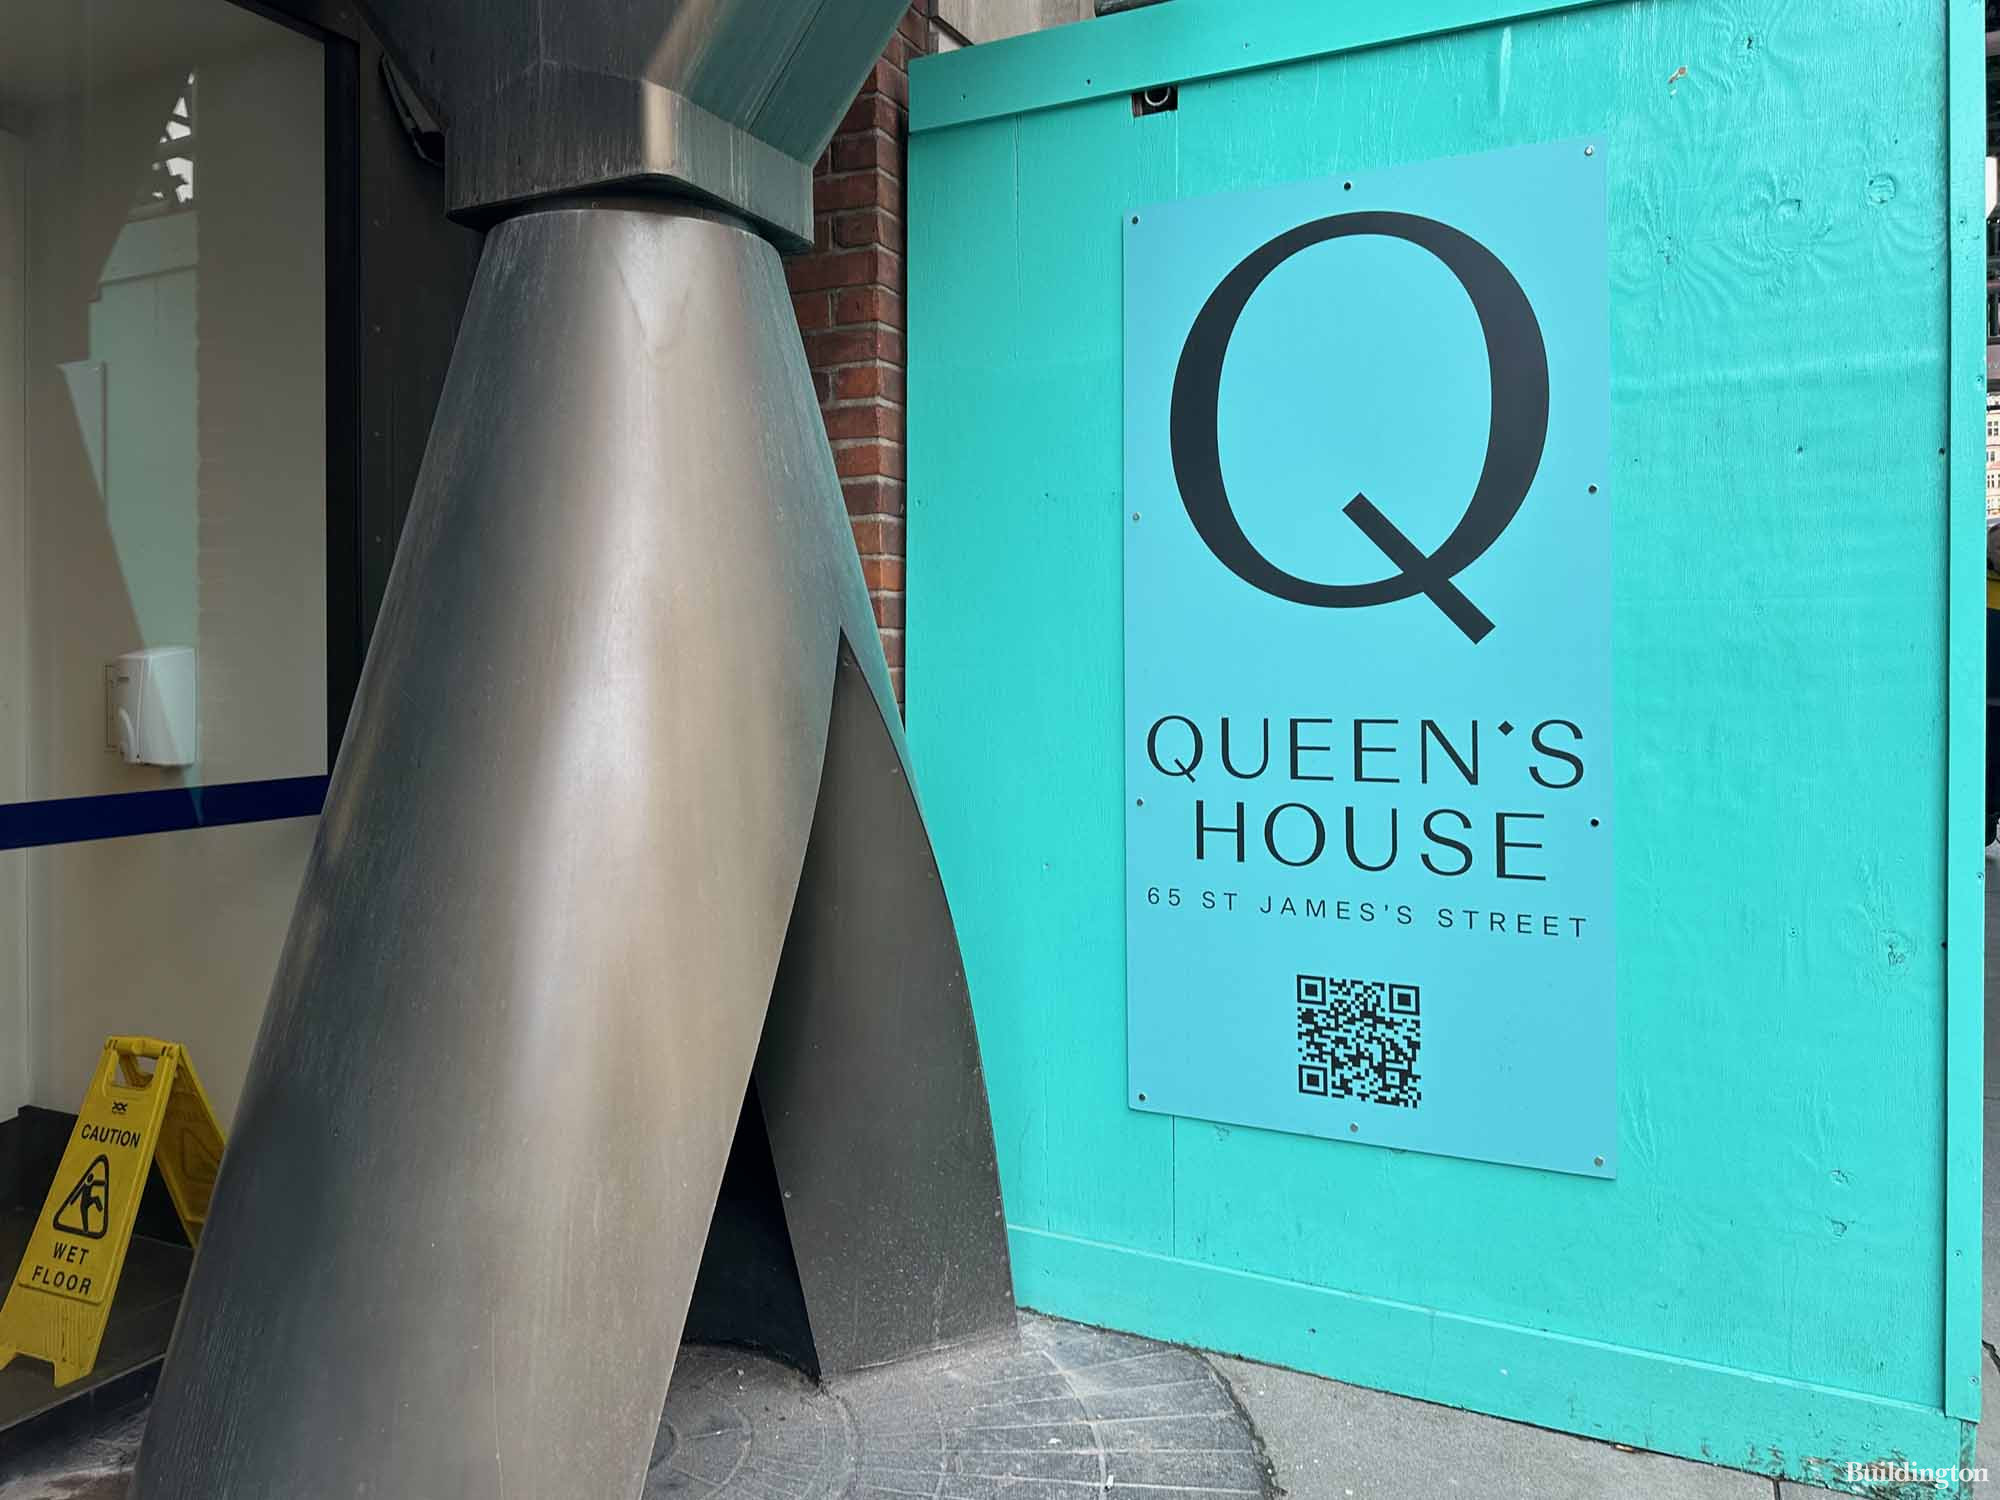 Queen's House on St James's Street in St James's, London SW1